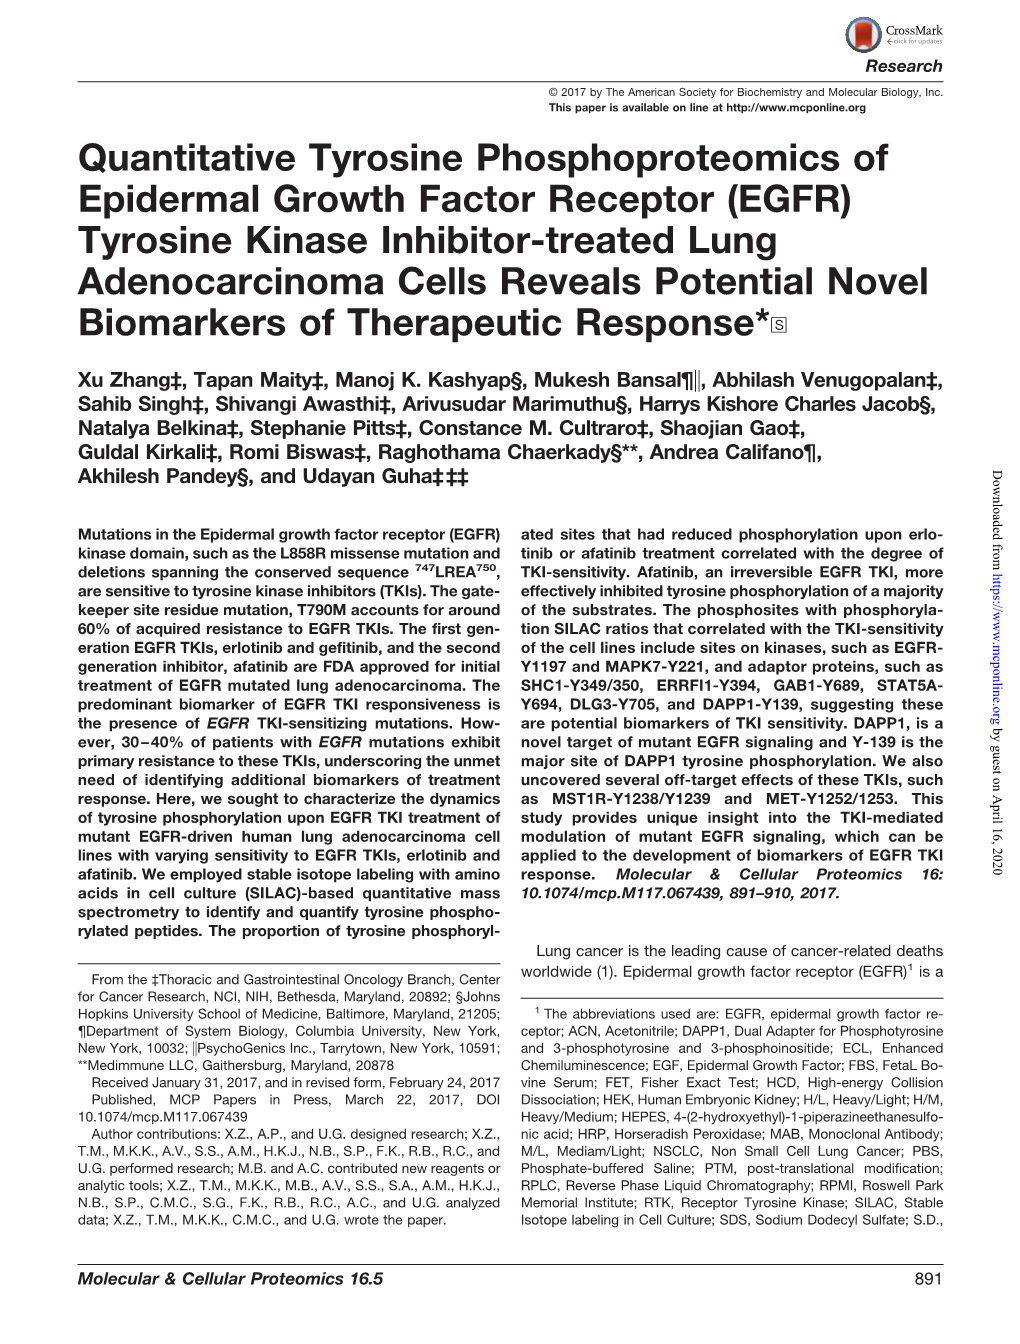 (EGFR) Tyrosine Kinase Inhibitor-Treated Lung Adenocarcinoma Cells Reveals Potential Novel Biomarkers of Therapeutic Response*□S